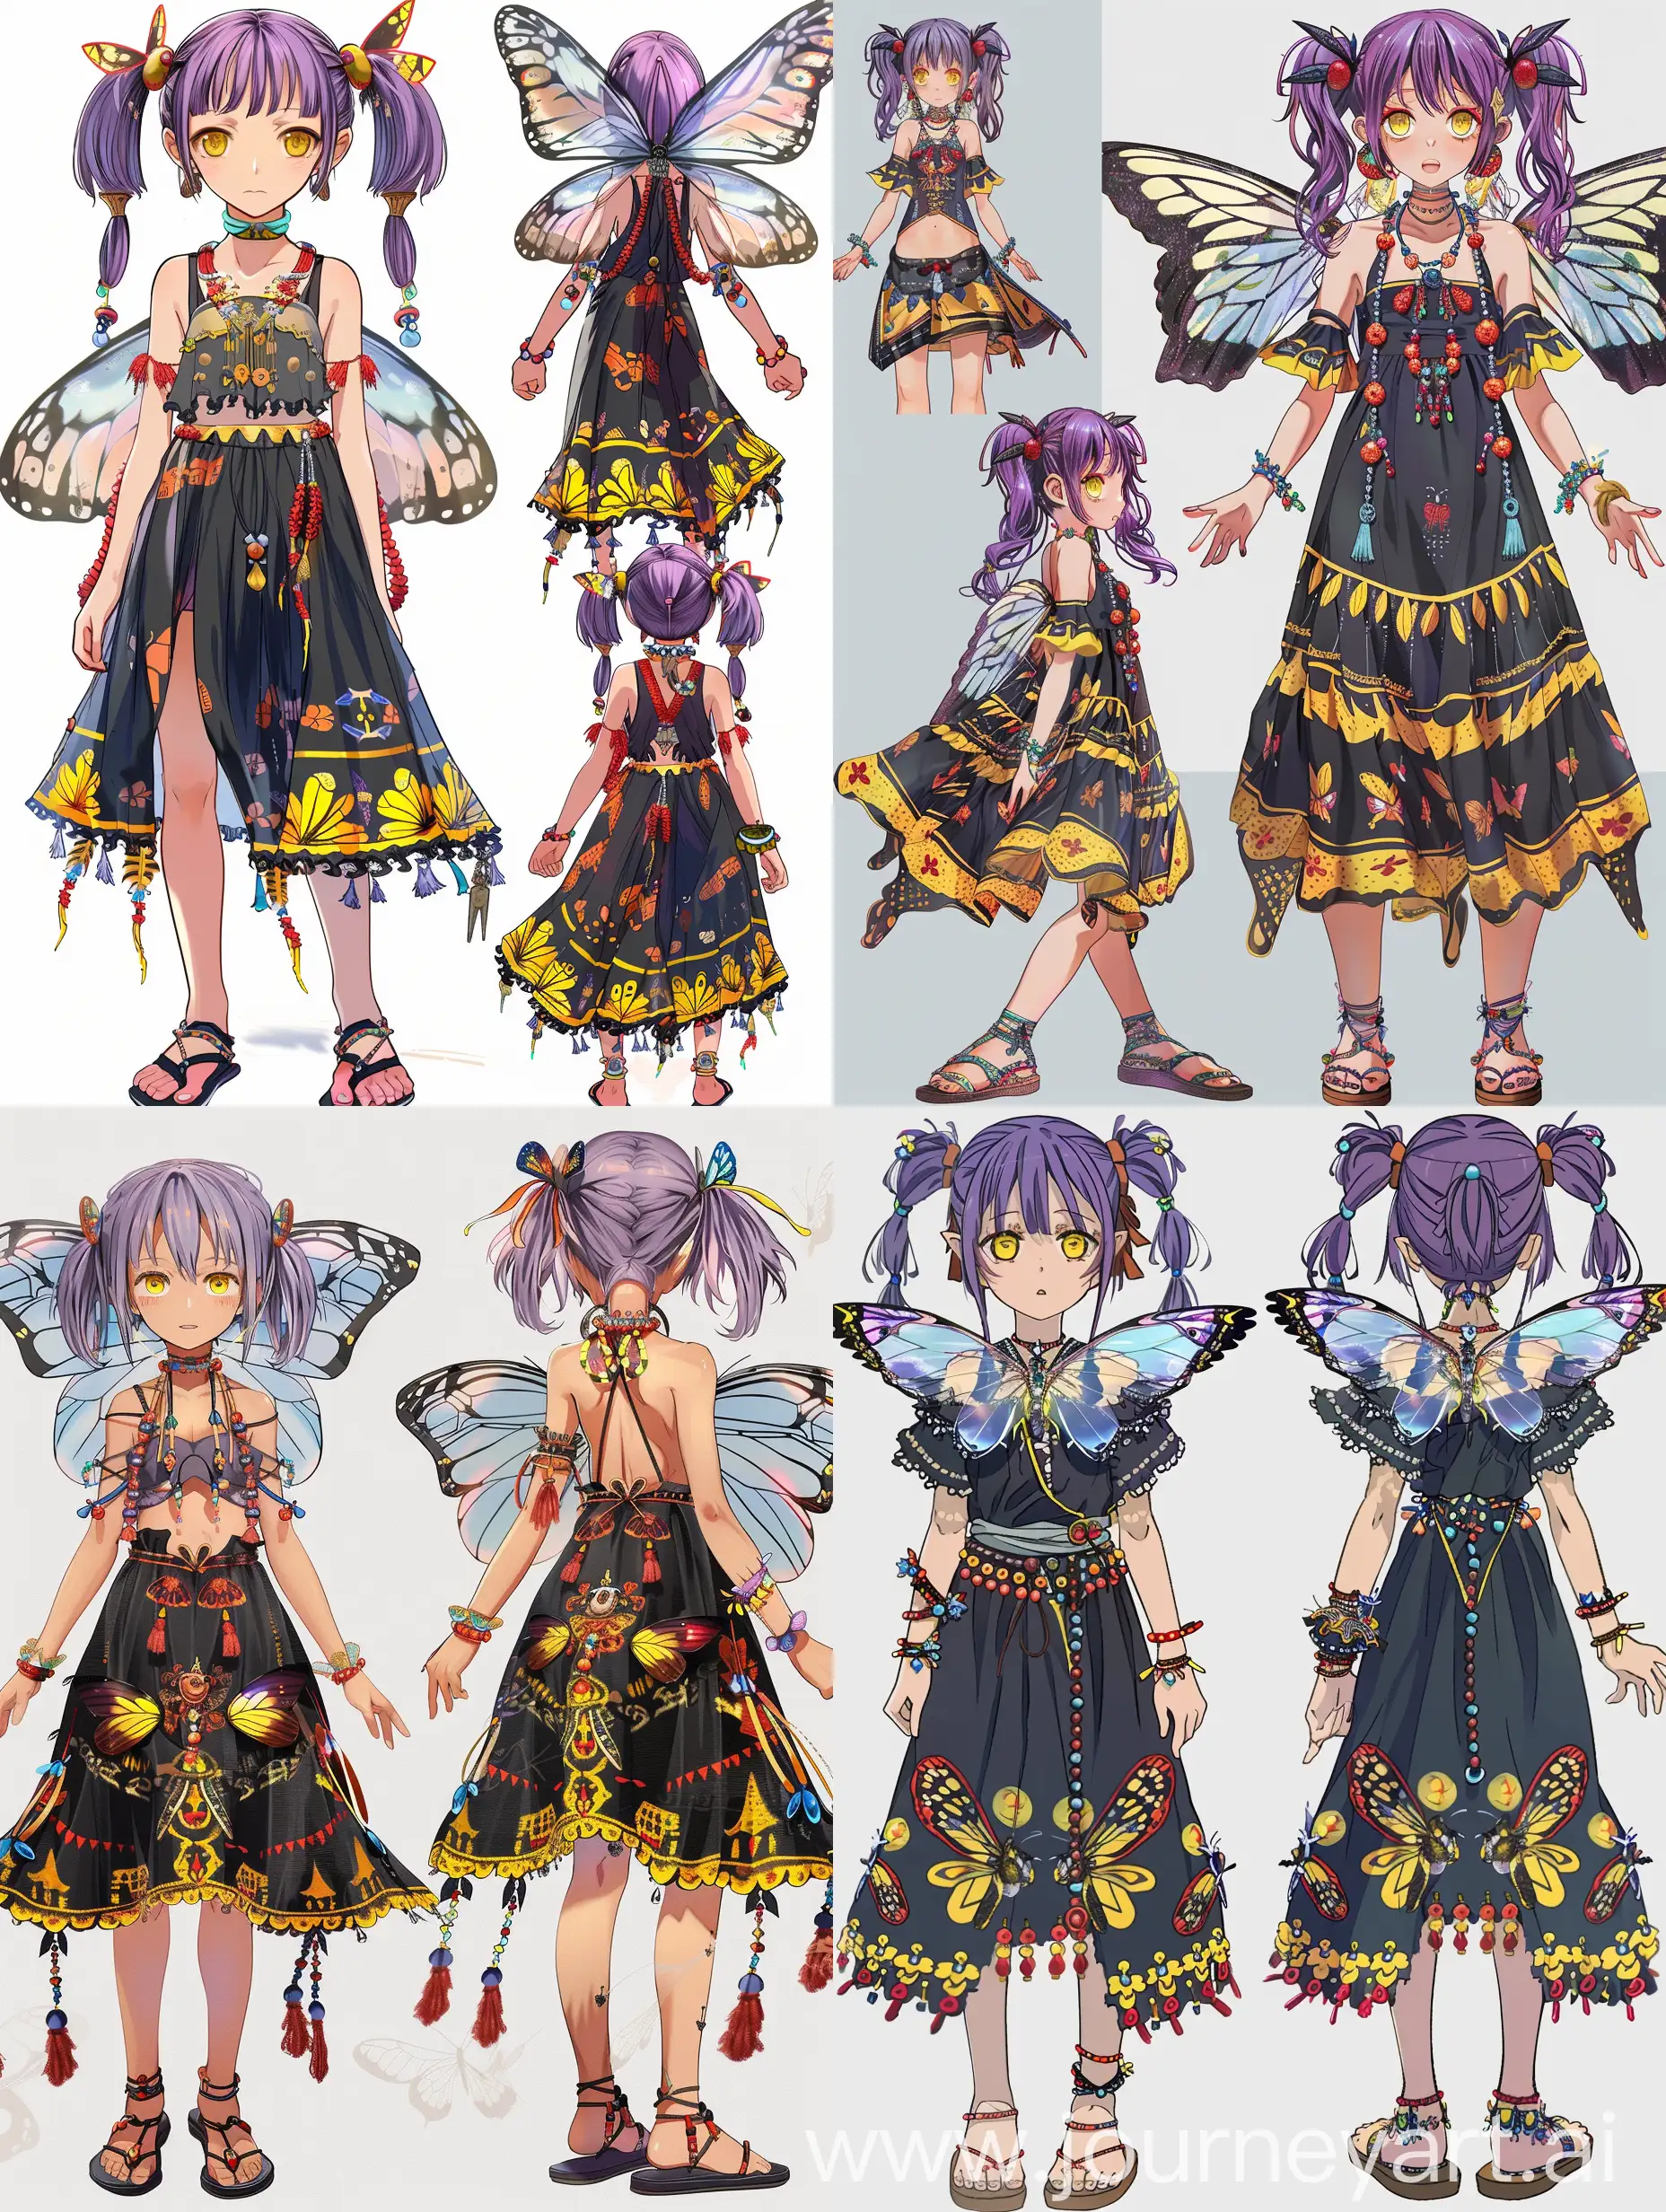 Anime-Girl-with-Purple-Hair-and-Butterfly-Wings-in-Gypsy-Dress